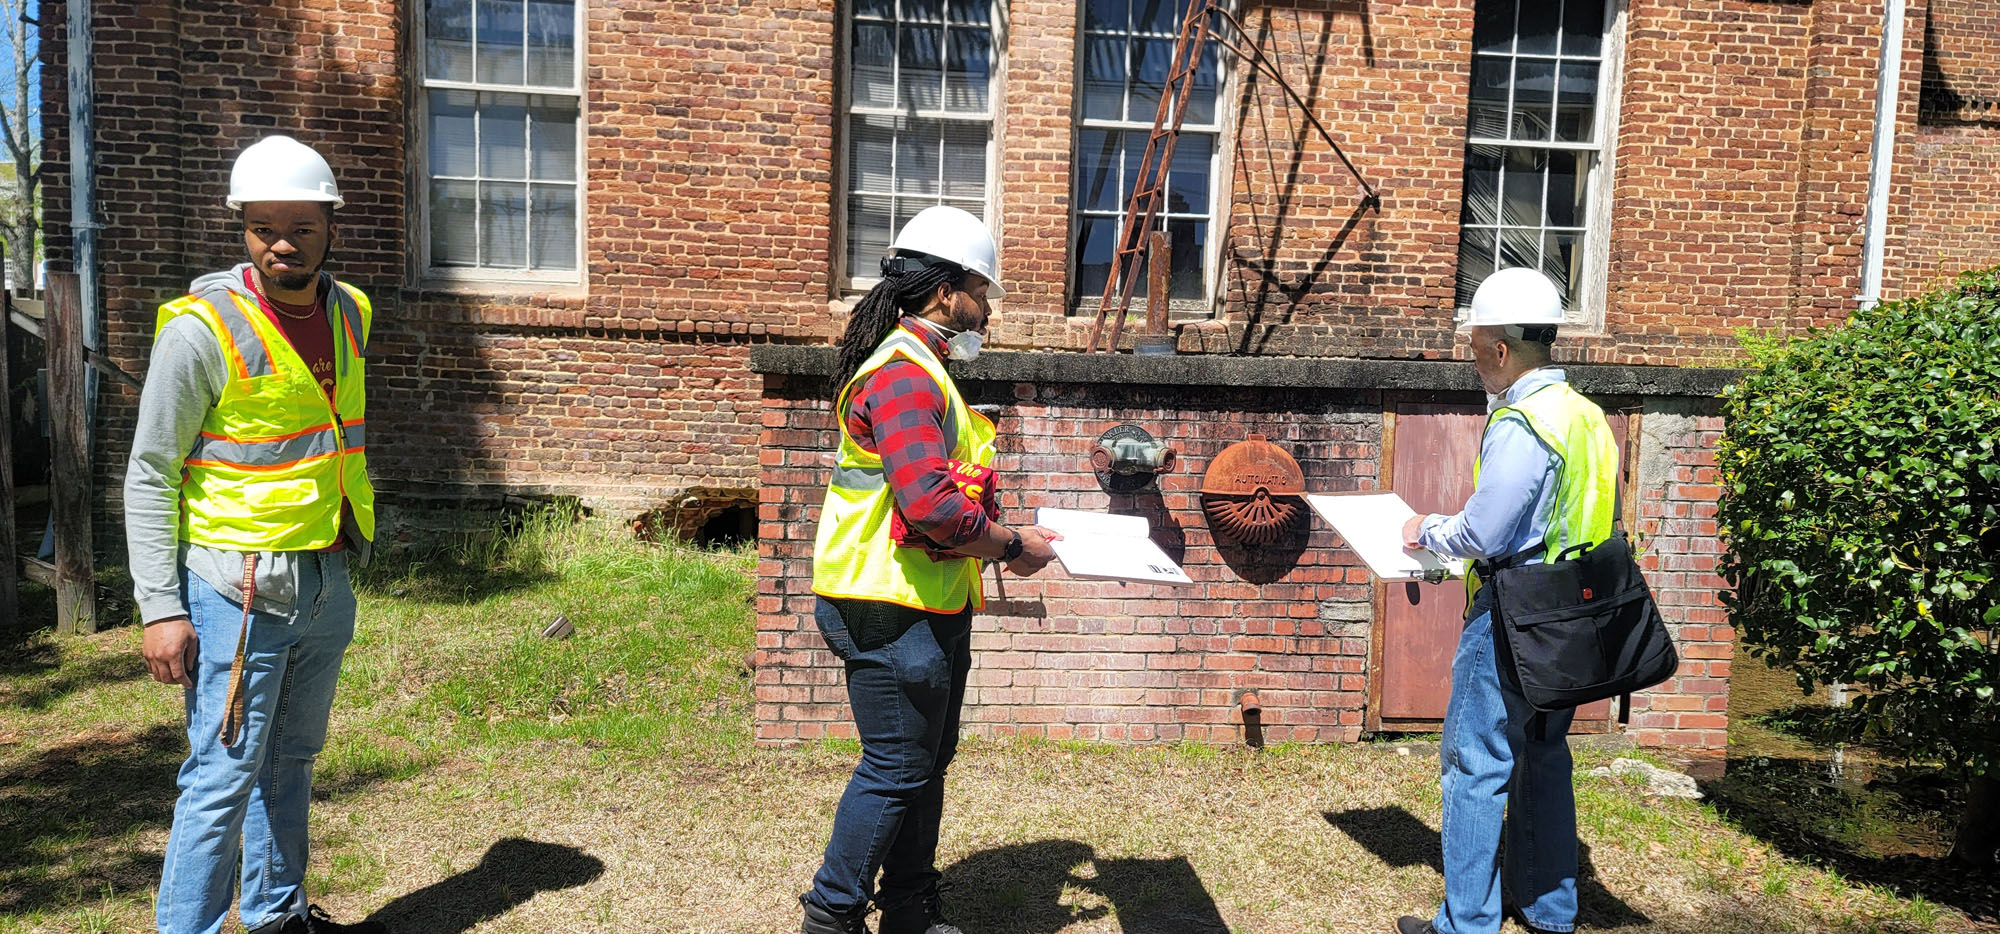 a photograph of three people in reflective vests inspecting a brick building